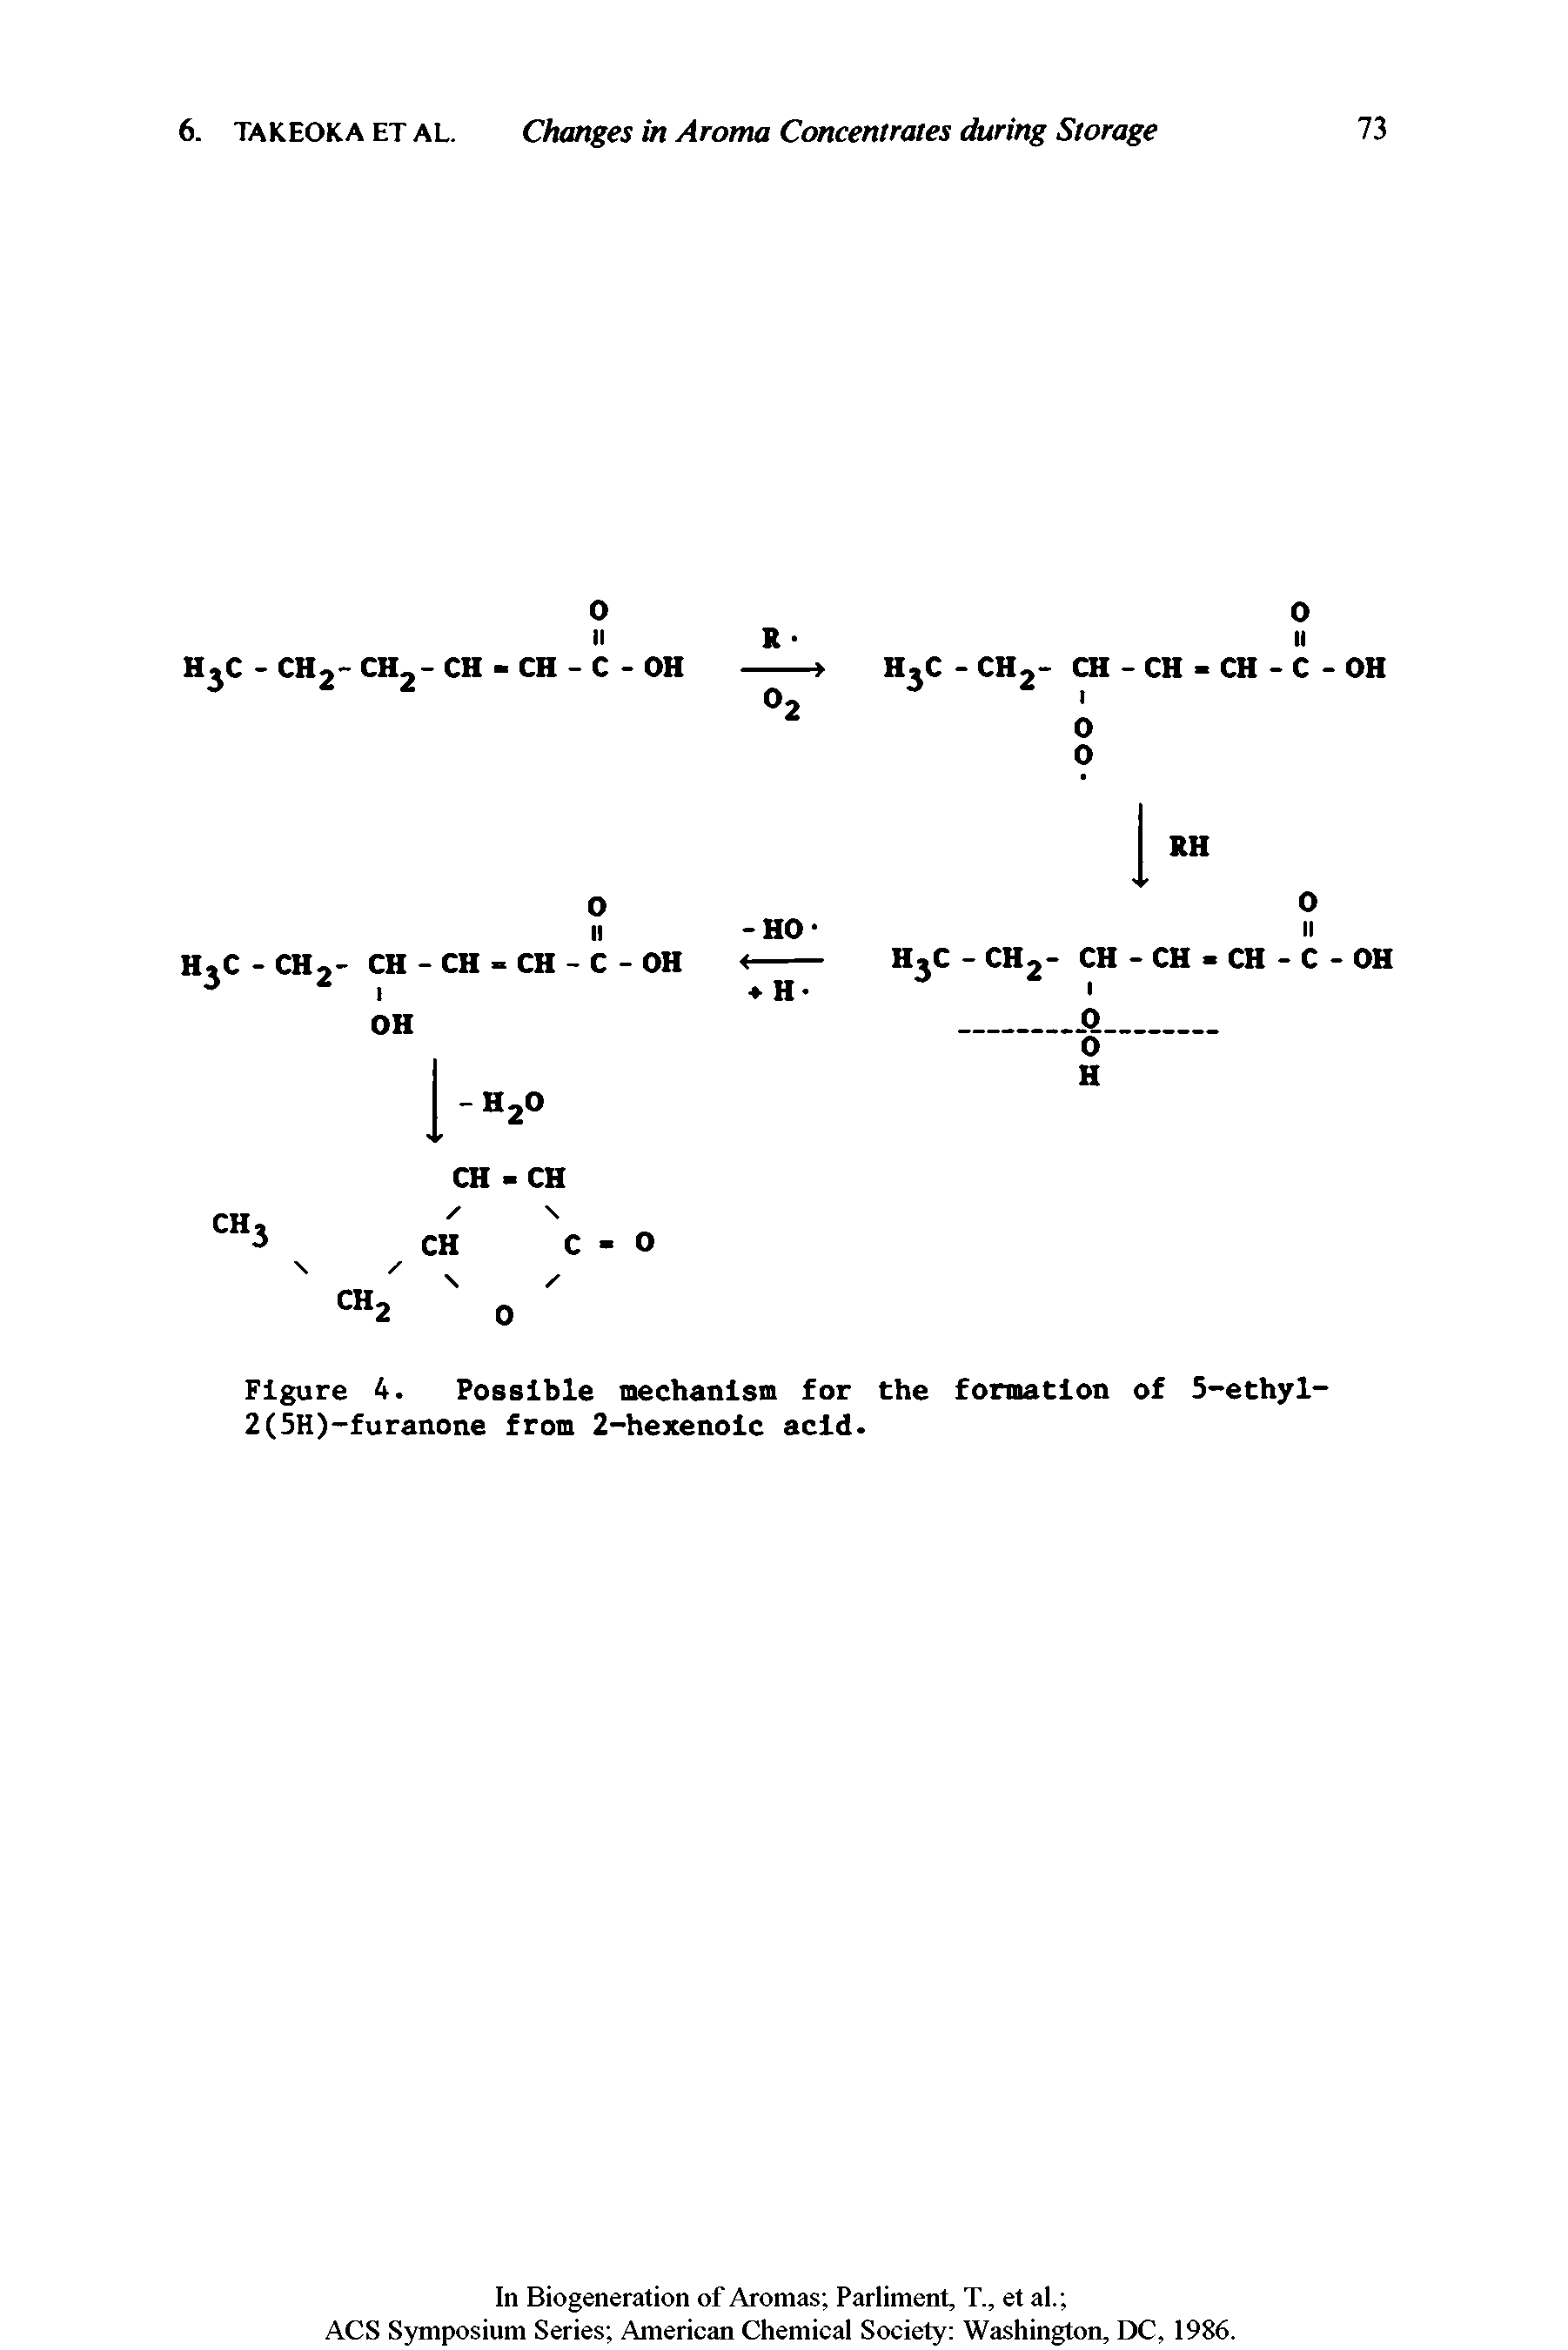 Figure 4. Possible mechanism for the formation of 5-ethyl-2(5H)-furanone from 2-hexenoic acid.